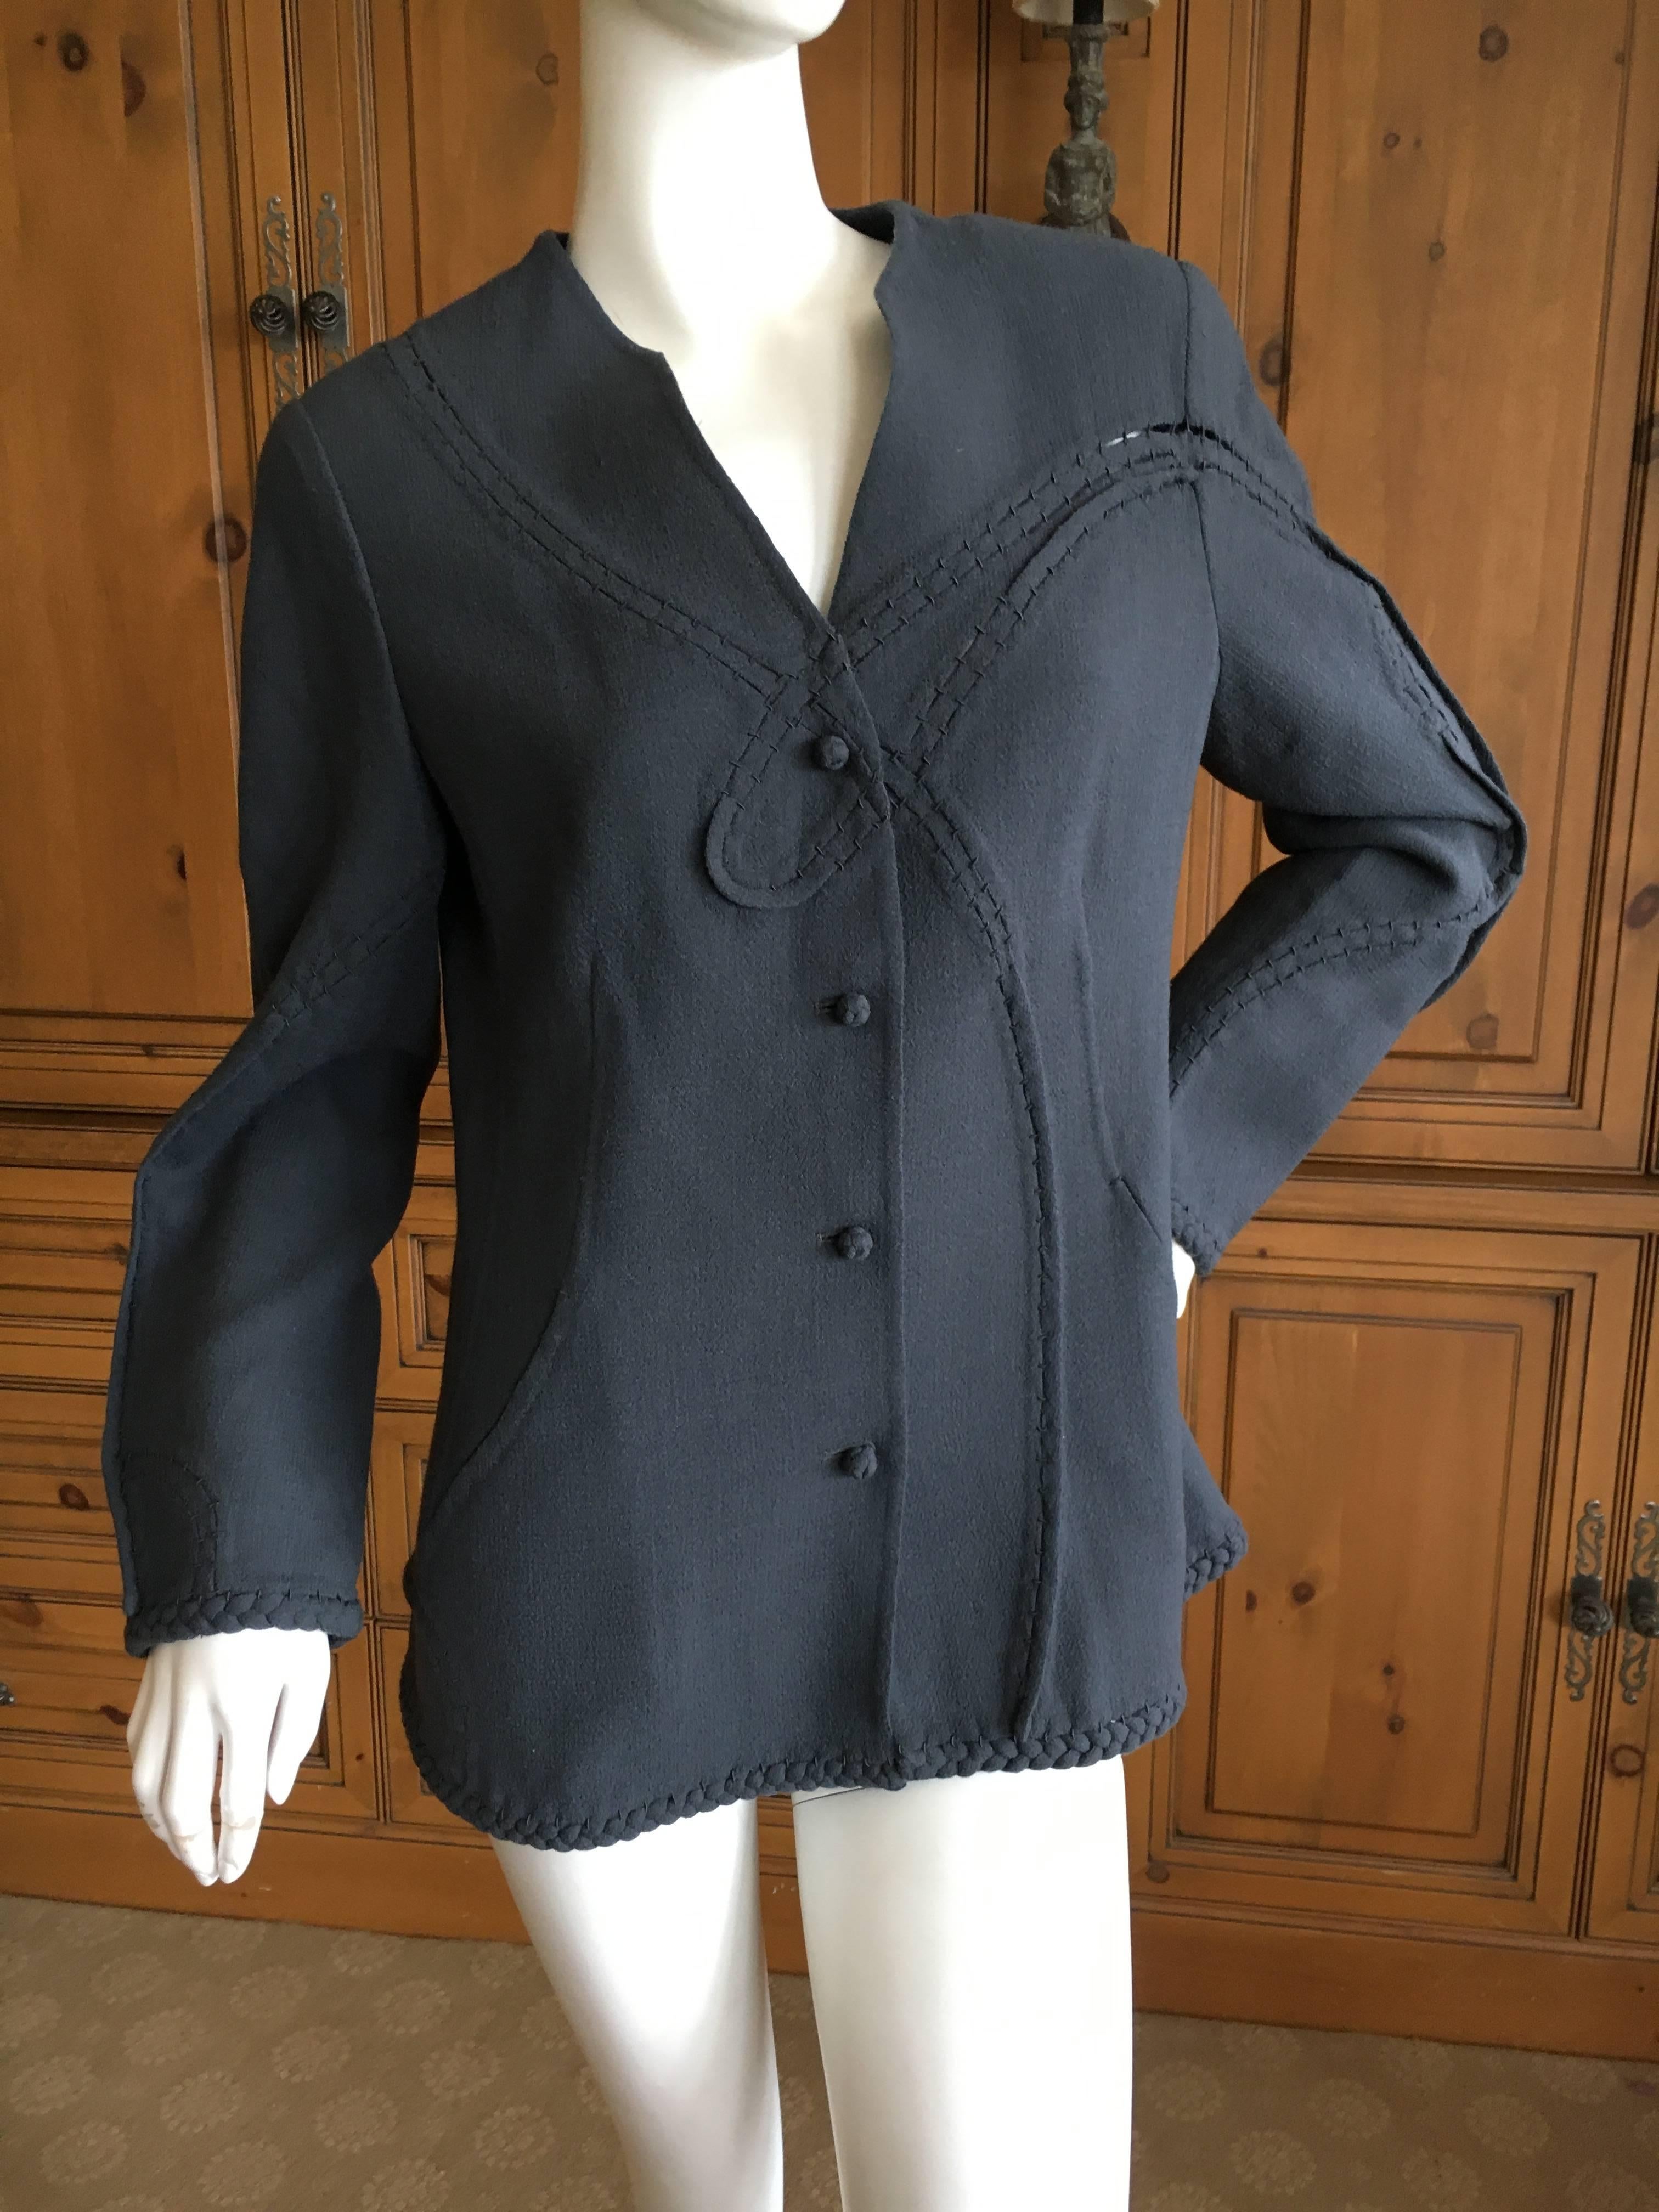 Chado Ralph Rucci Gray Jacket with Woven Details In Excellent Condition For Sale In Cloverdale, CA